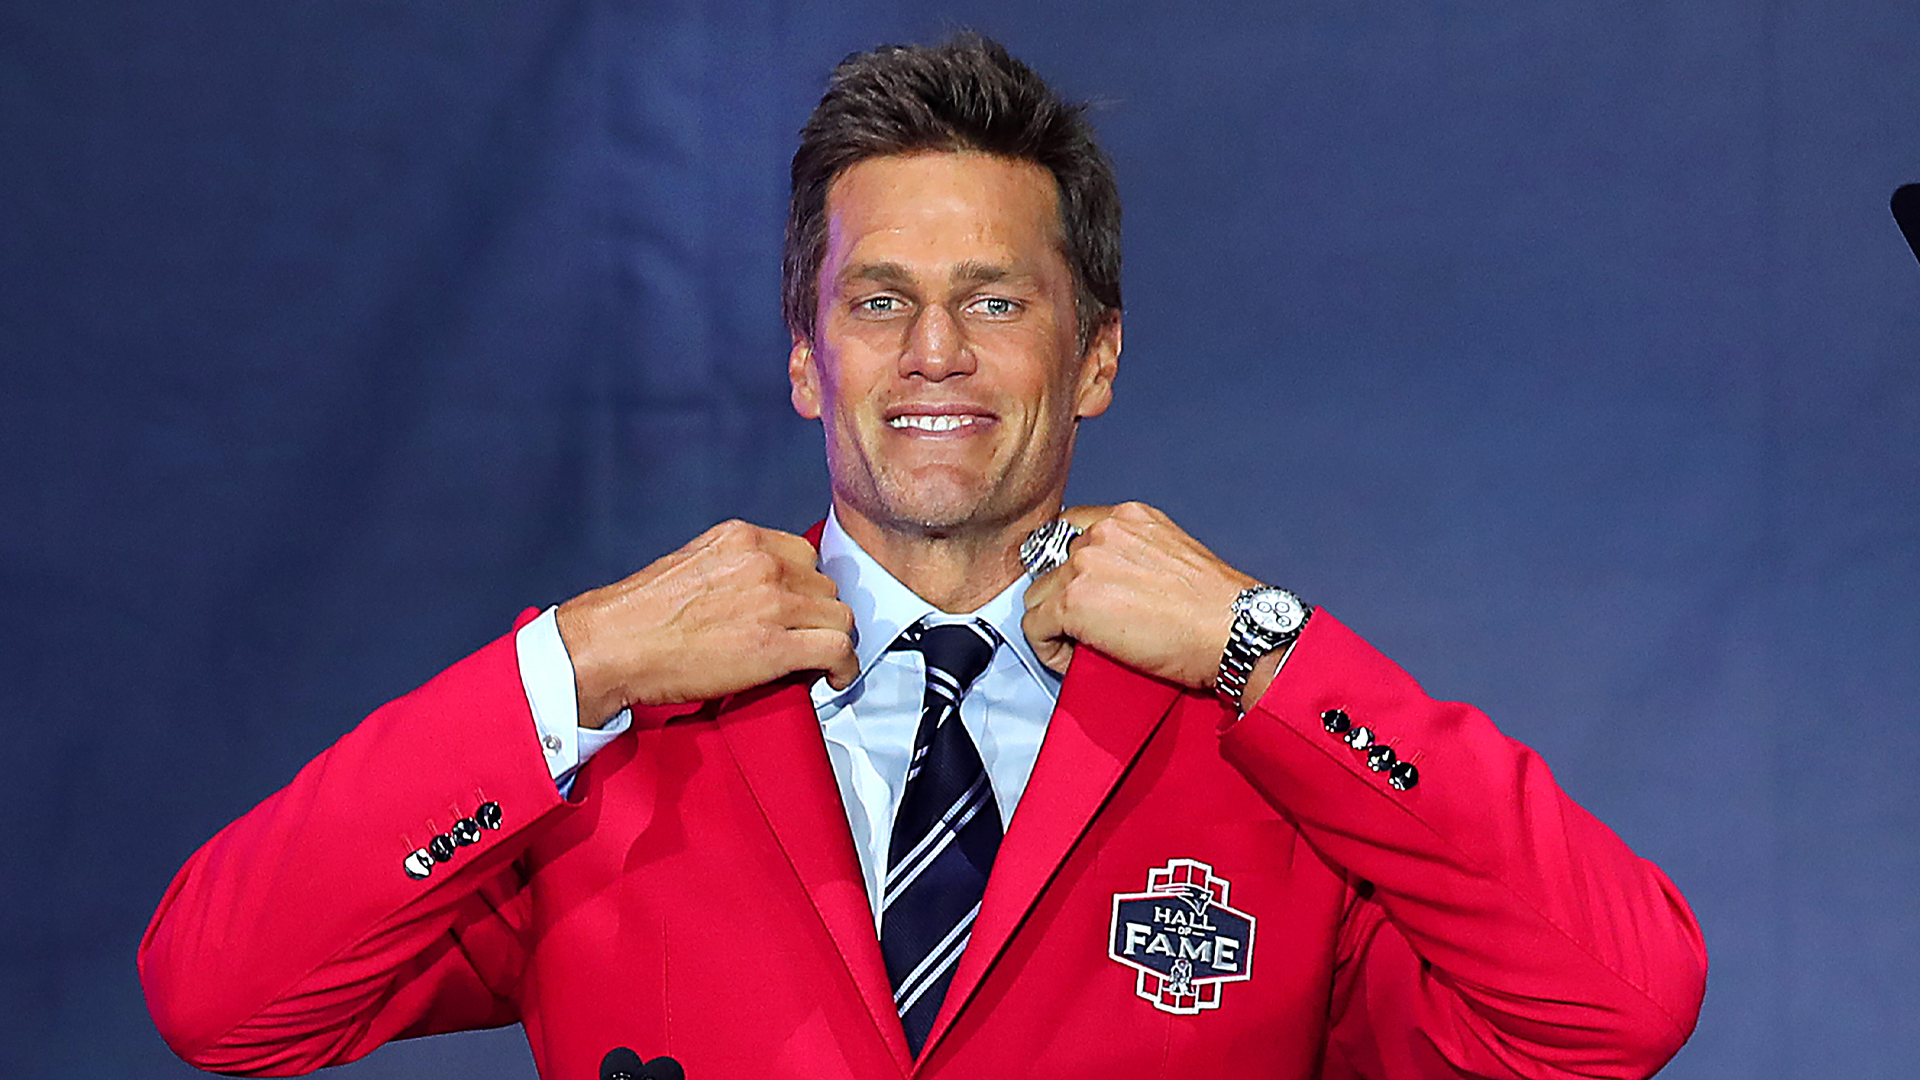 Tom Brady in another huge business venture as NFL legend continues million-dollar portfolio expansion in retirement [Video]